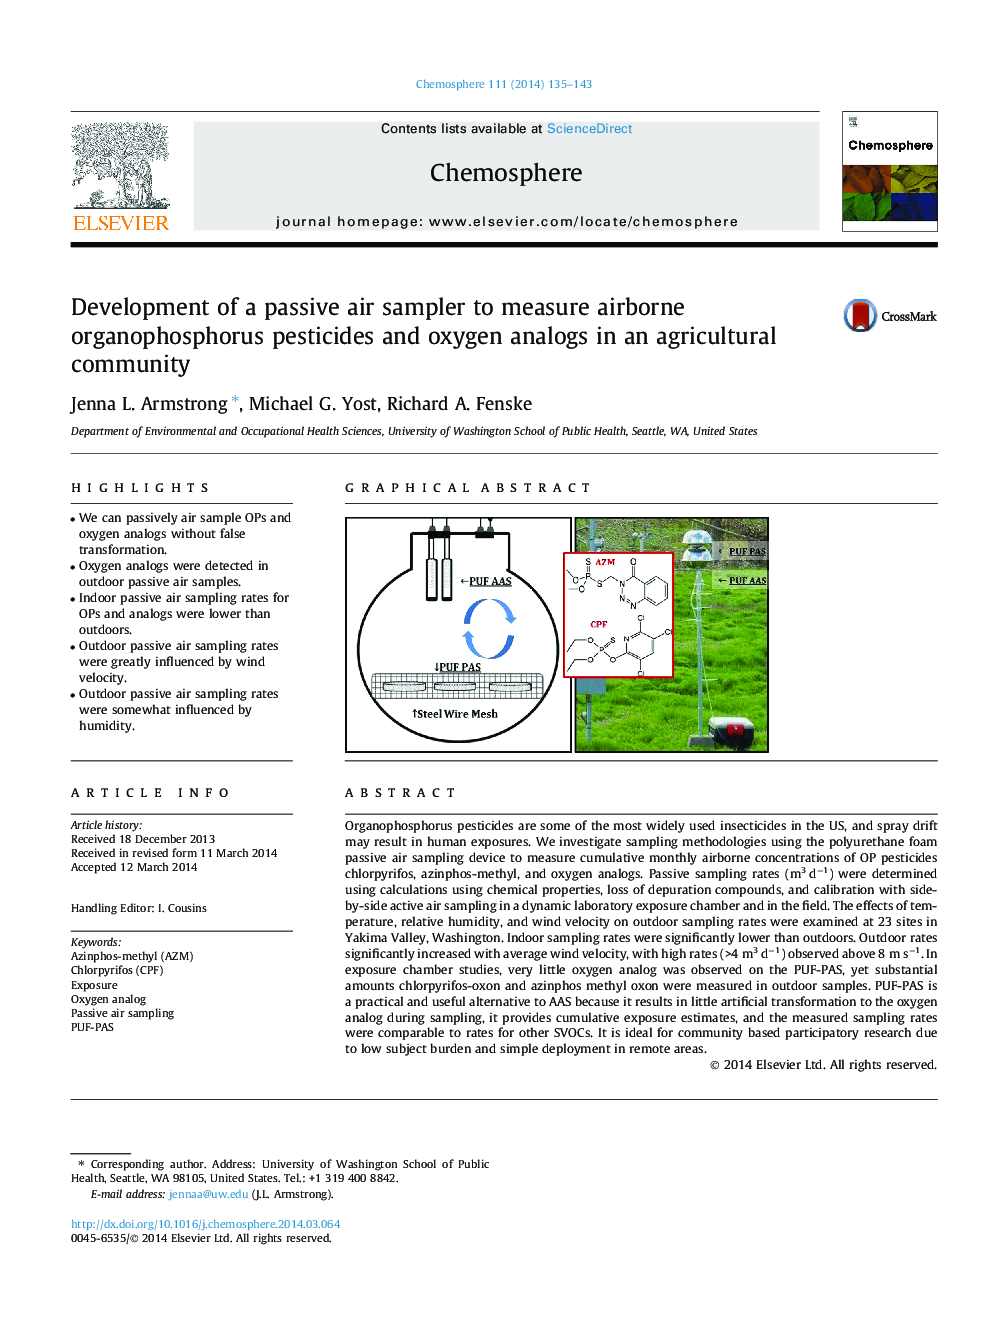 Development of a passive air sampler to measure airborne organophosphorus pesticides and oxygen analogs in an agricultural community